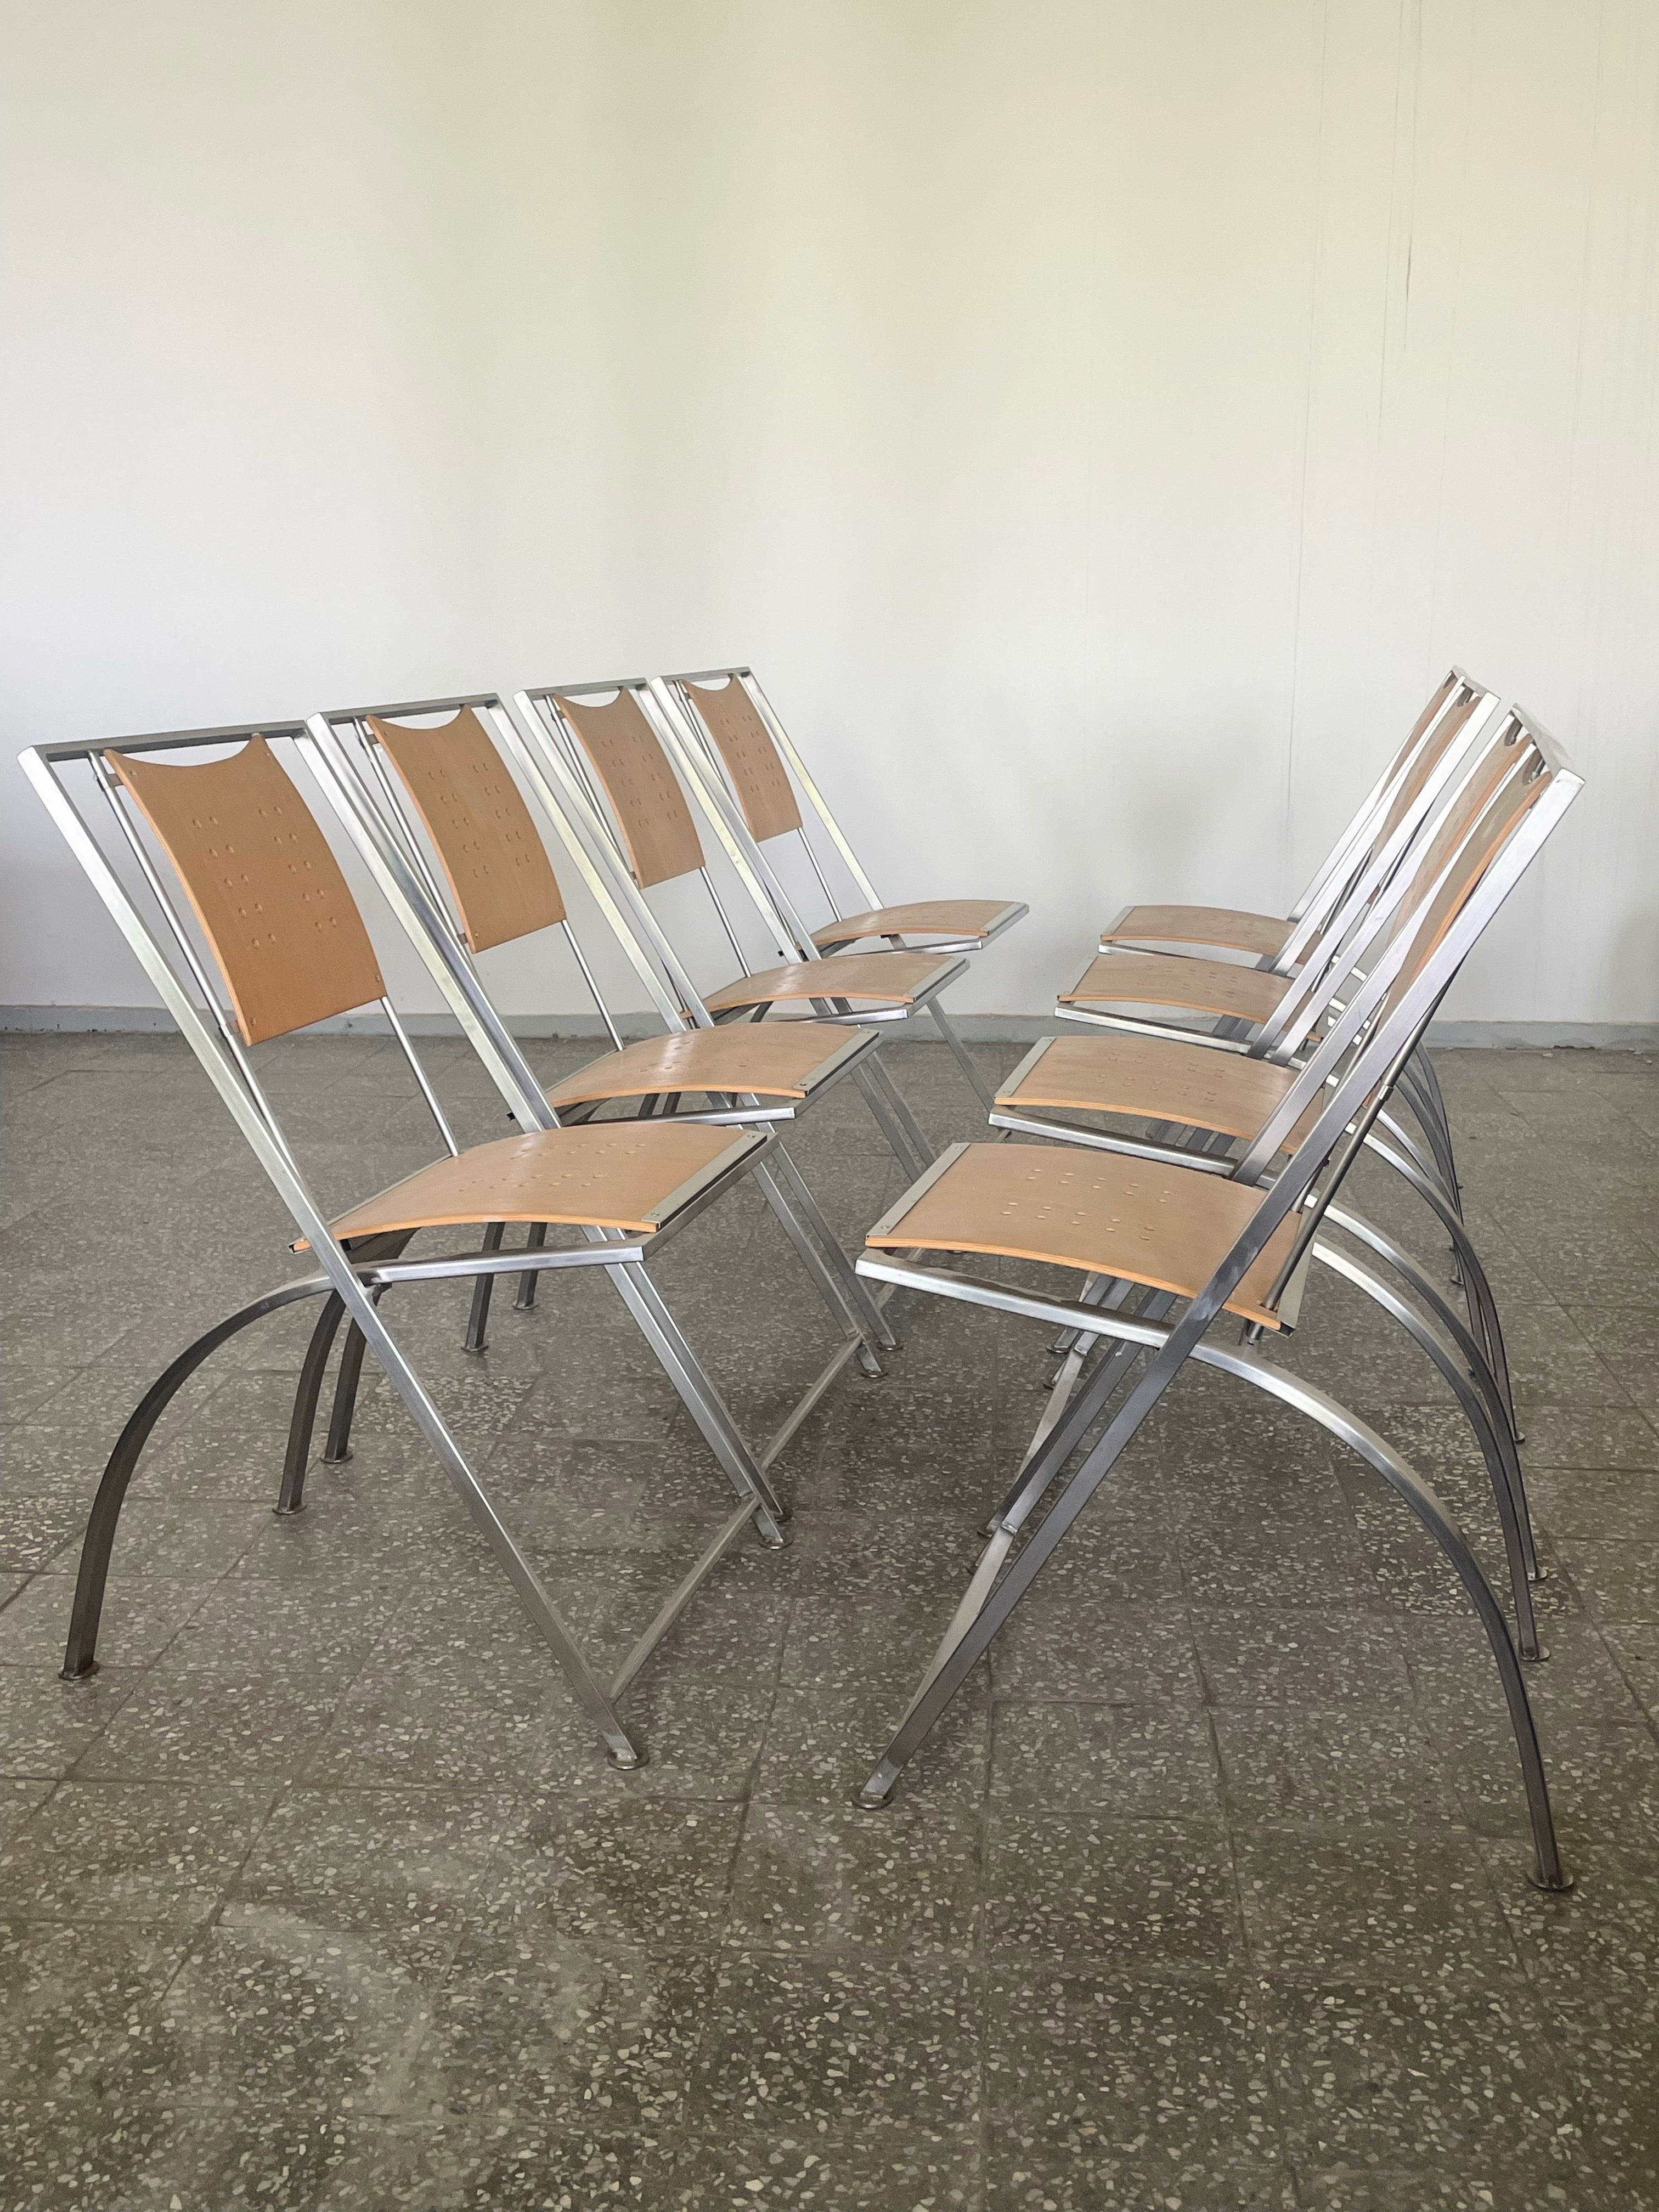  Rare set  of 8 brushed steel and plywood stackable dining chairs designed by Karl Friedrich Förster for KFF .In the 1980s, the company likely offered dining chairs with clean lines, sleek shapes, and minimalist aesthetics that were popular during